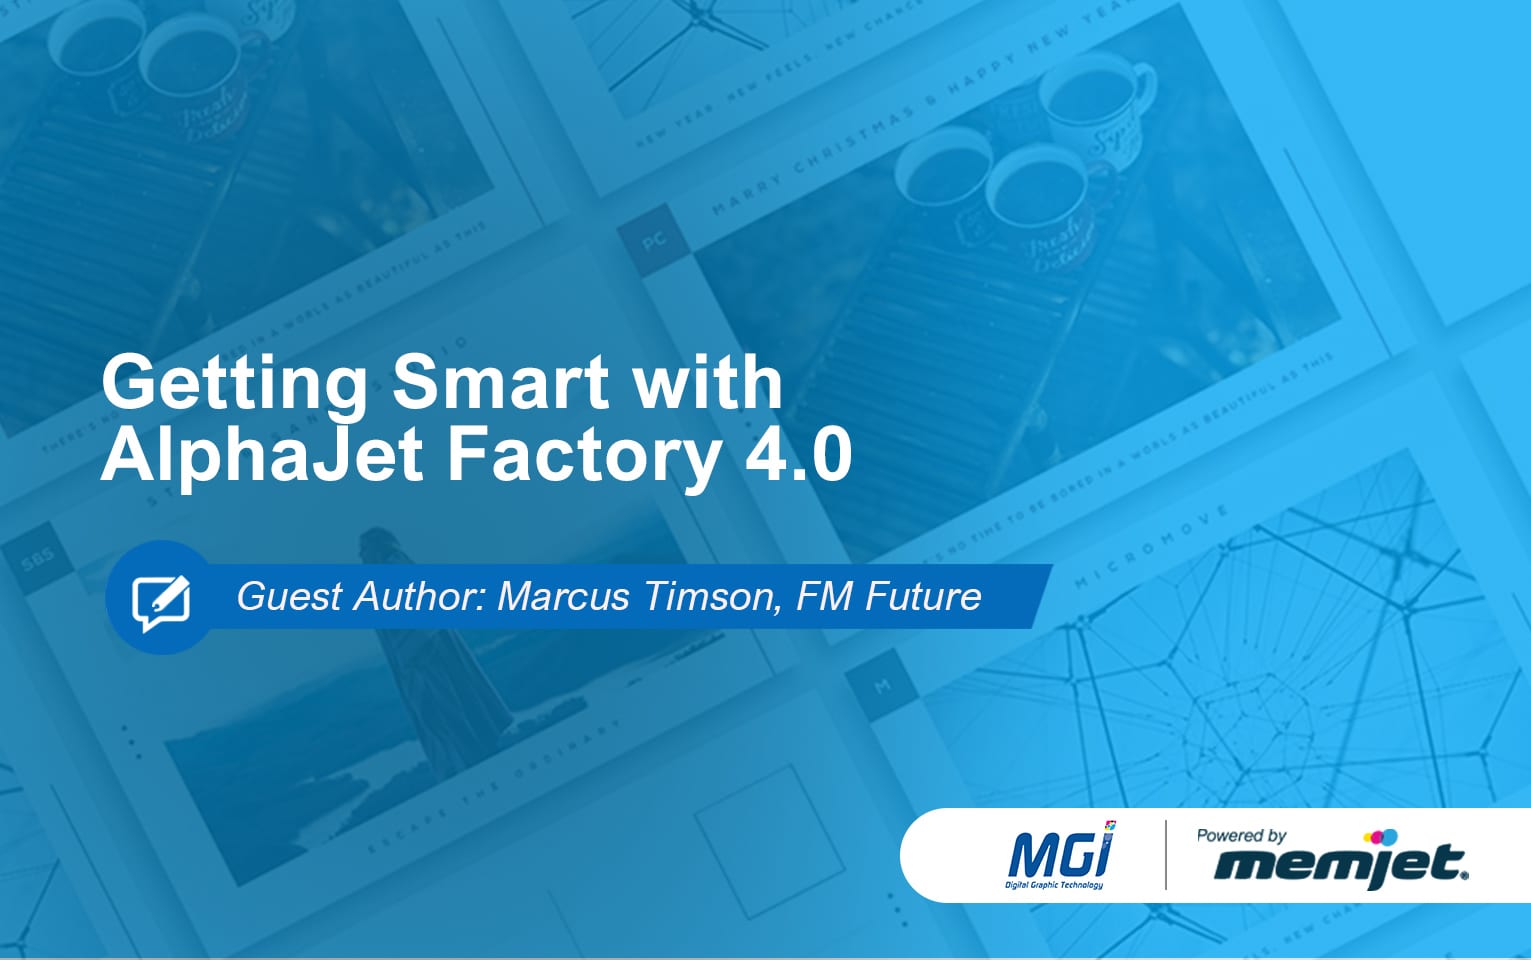 Getting Smart with AlphaJet Factory 4.0